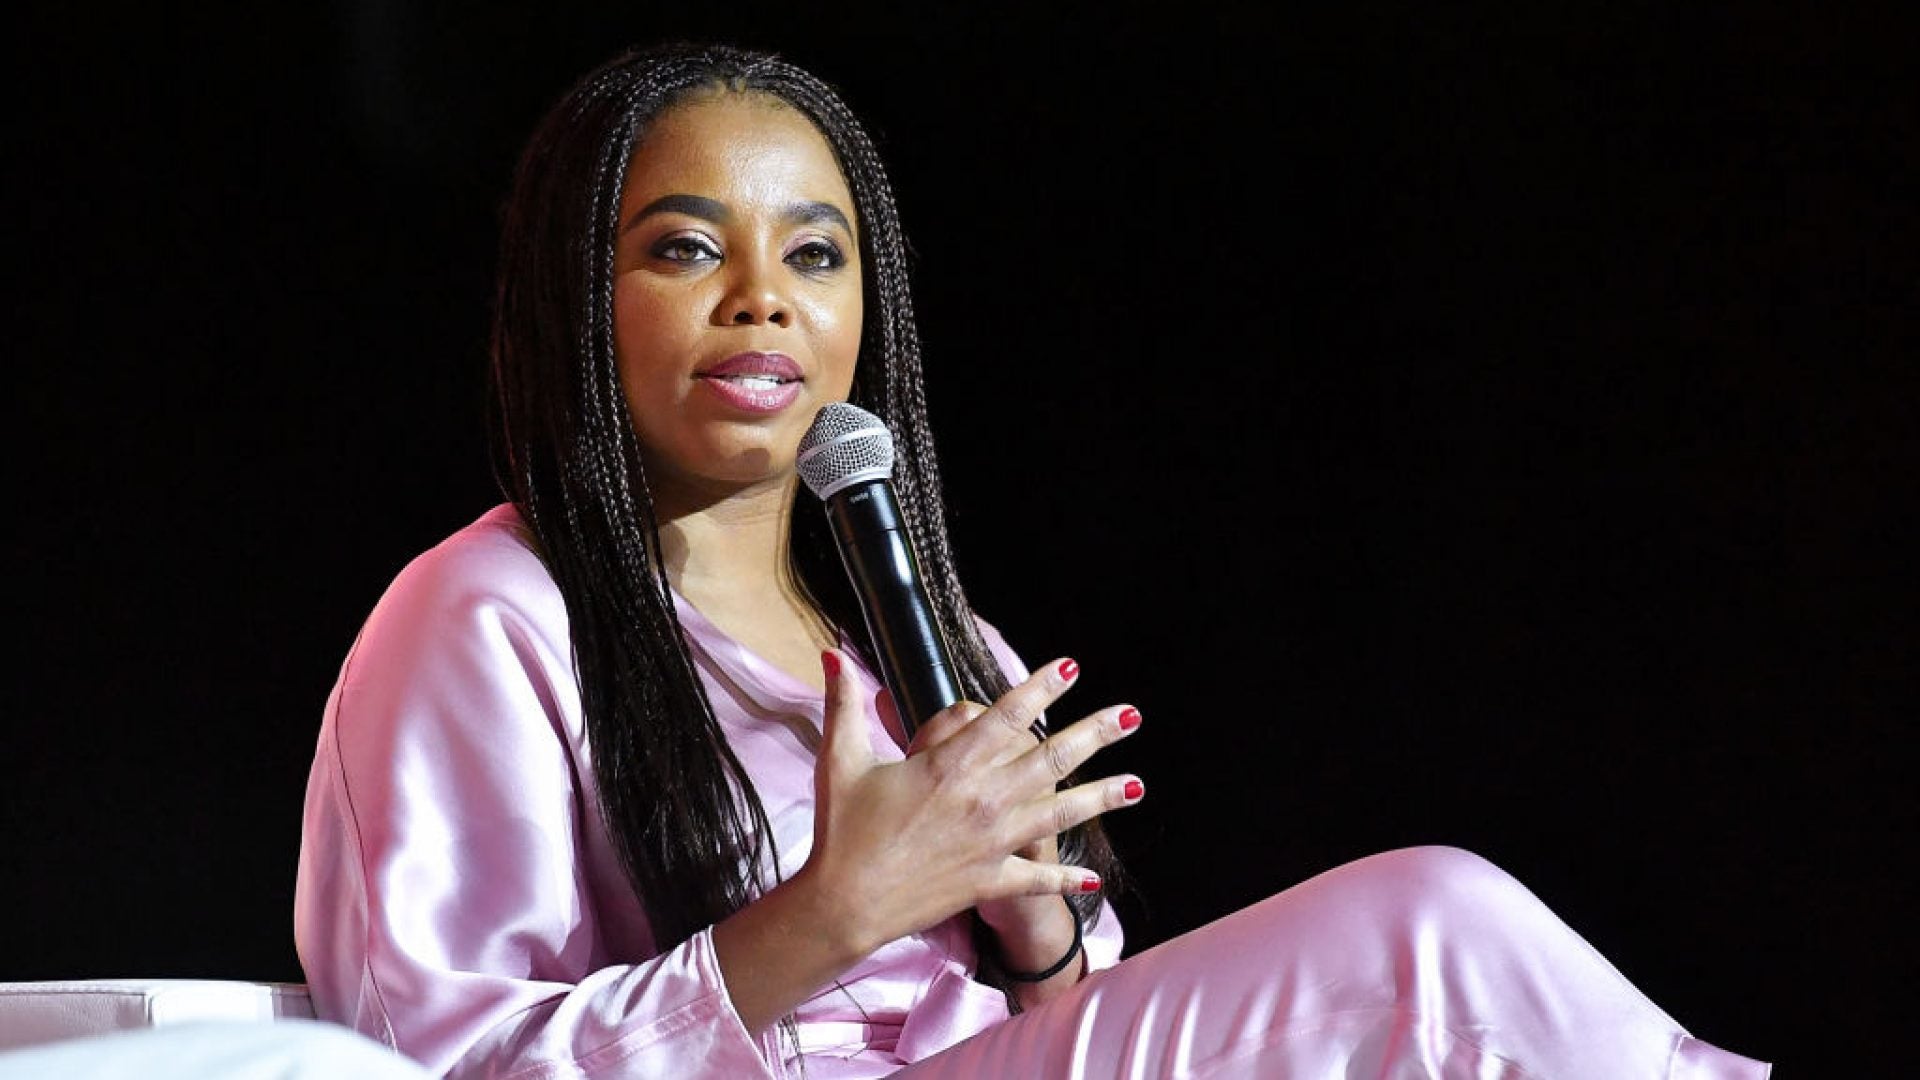 Jemele Hill Partners With Spotify To Launch Podcast Network To Amplify Black Female Voices